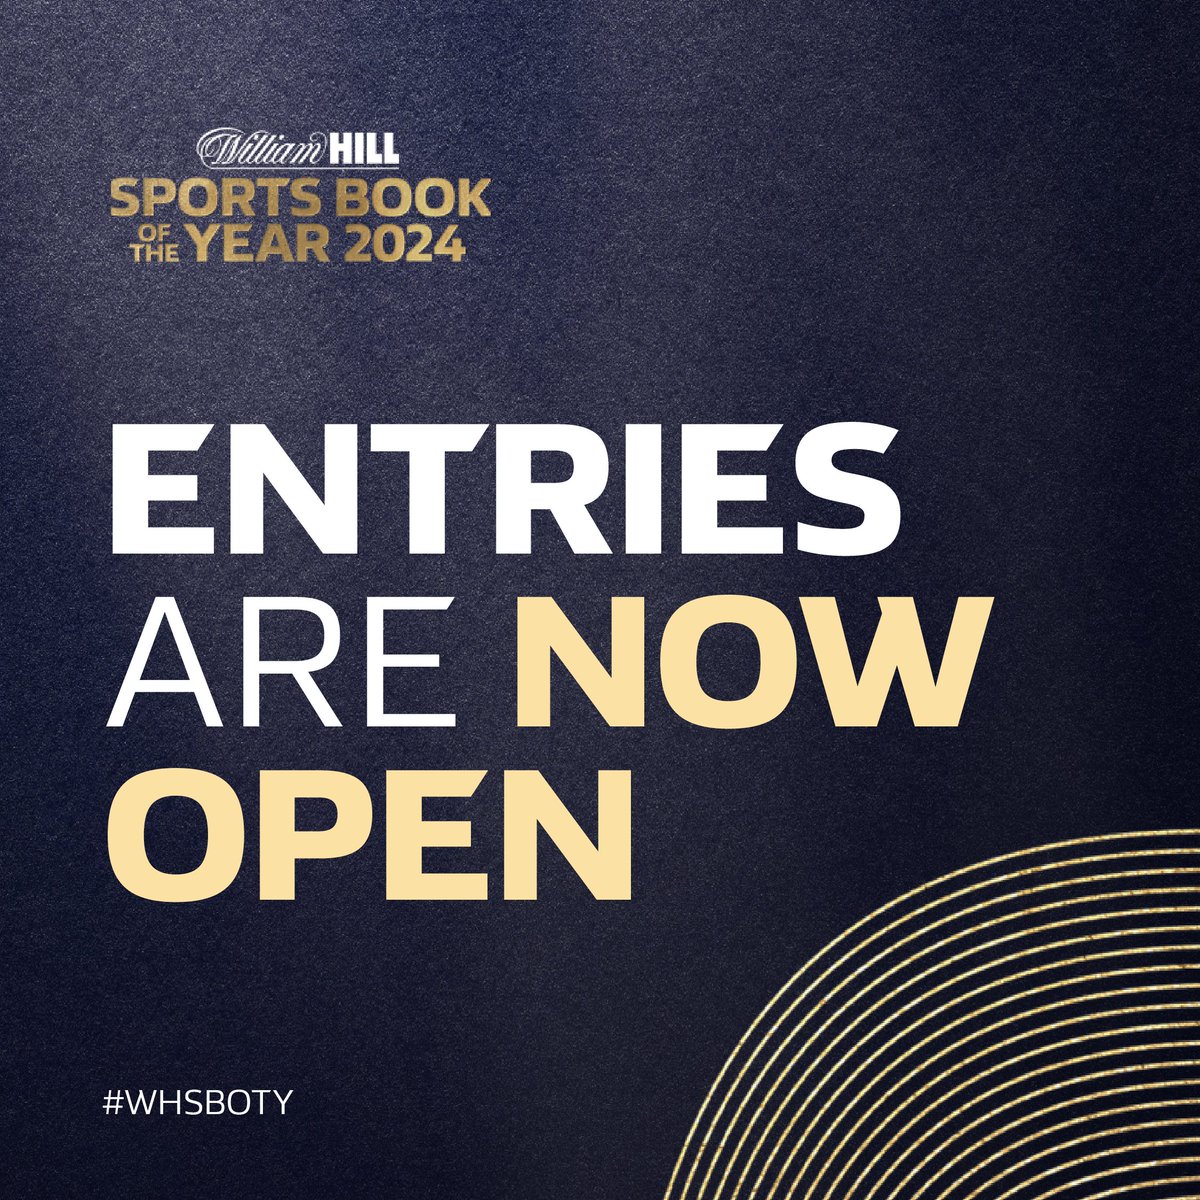 📢 𝑨𝑻𝑻𝑬𝑵𝑻𝑰𝑶𝑵 𝑺𝑷𝑶𝑹𝑻𝑺 𝑨𝑼𝑻𝑯𝑶𝑹𝑺! Entries are still open for this year’s William Hill Sports Book of the Year award! 🏆 Get involved today for the chance to win the most valuable literary sports-writing prize. The winner will receive £30,000 and a #WHSBOTY